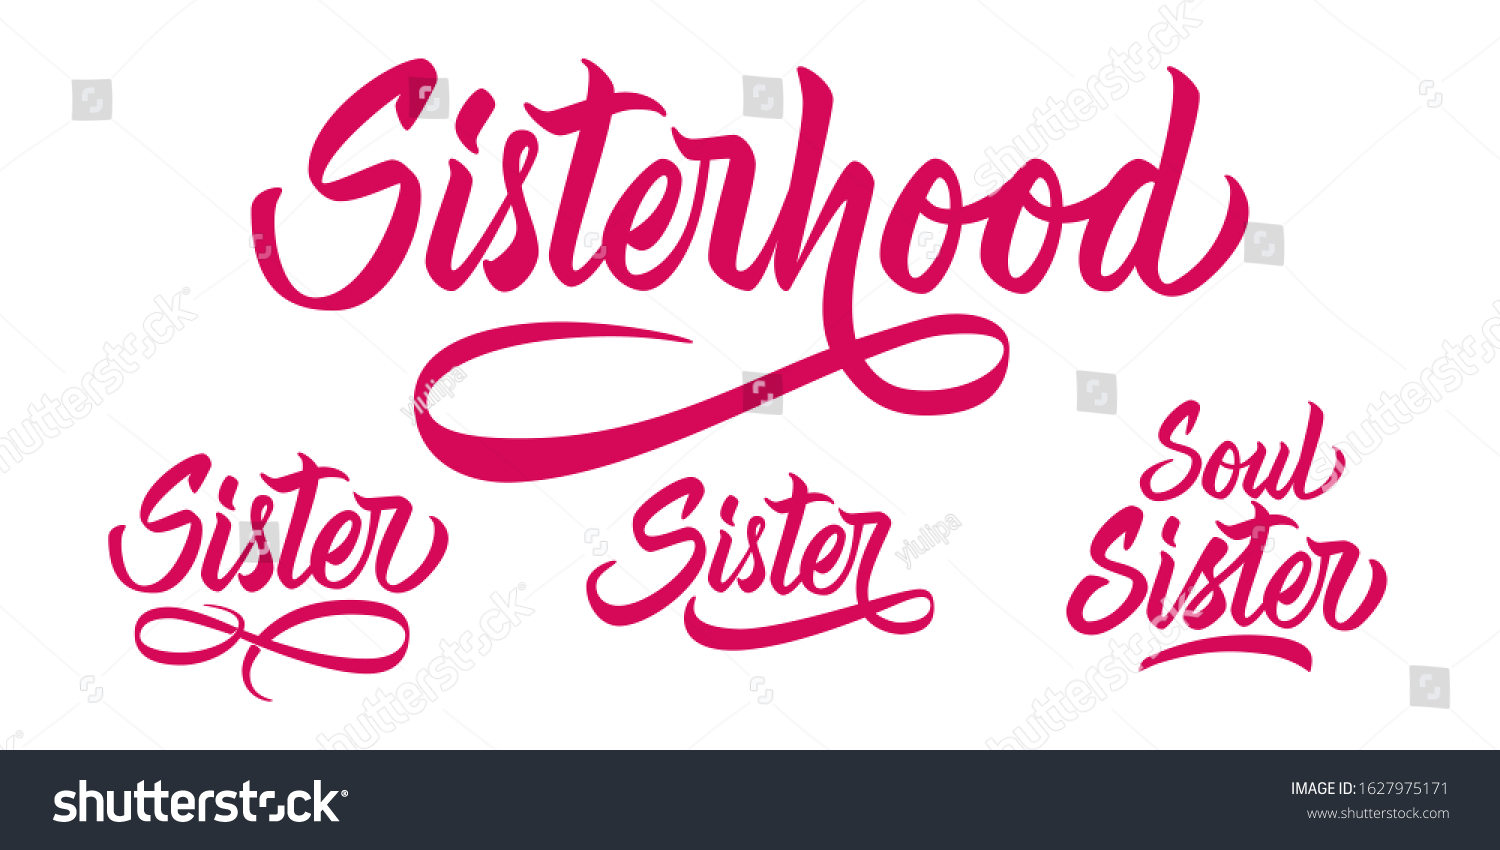 SVG of Sisterhood, Sister, Soul Sister - hand lettering inscription with rays on pink background for banners, posters, t-shirts, bags, mugs, cards, posters. Vector. svg